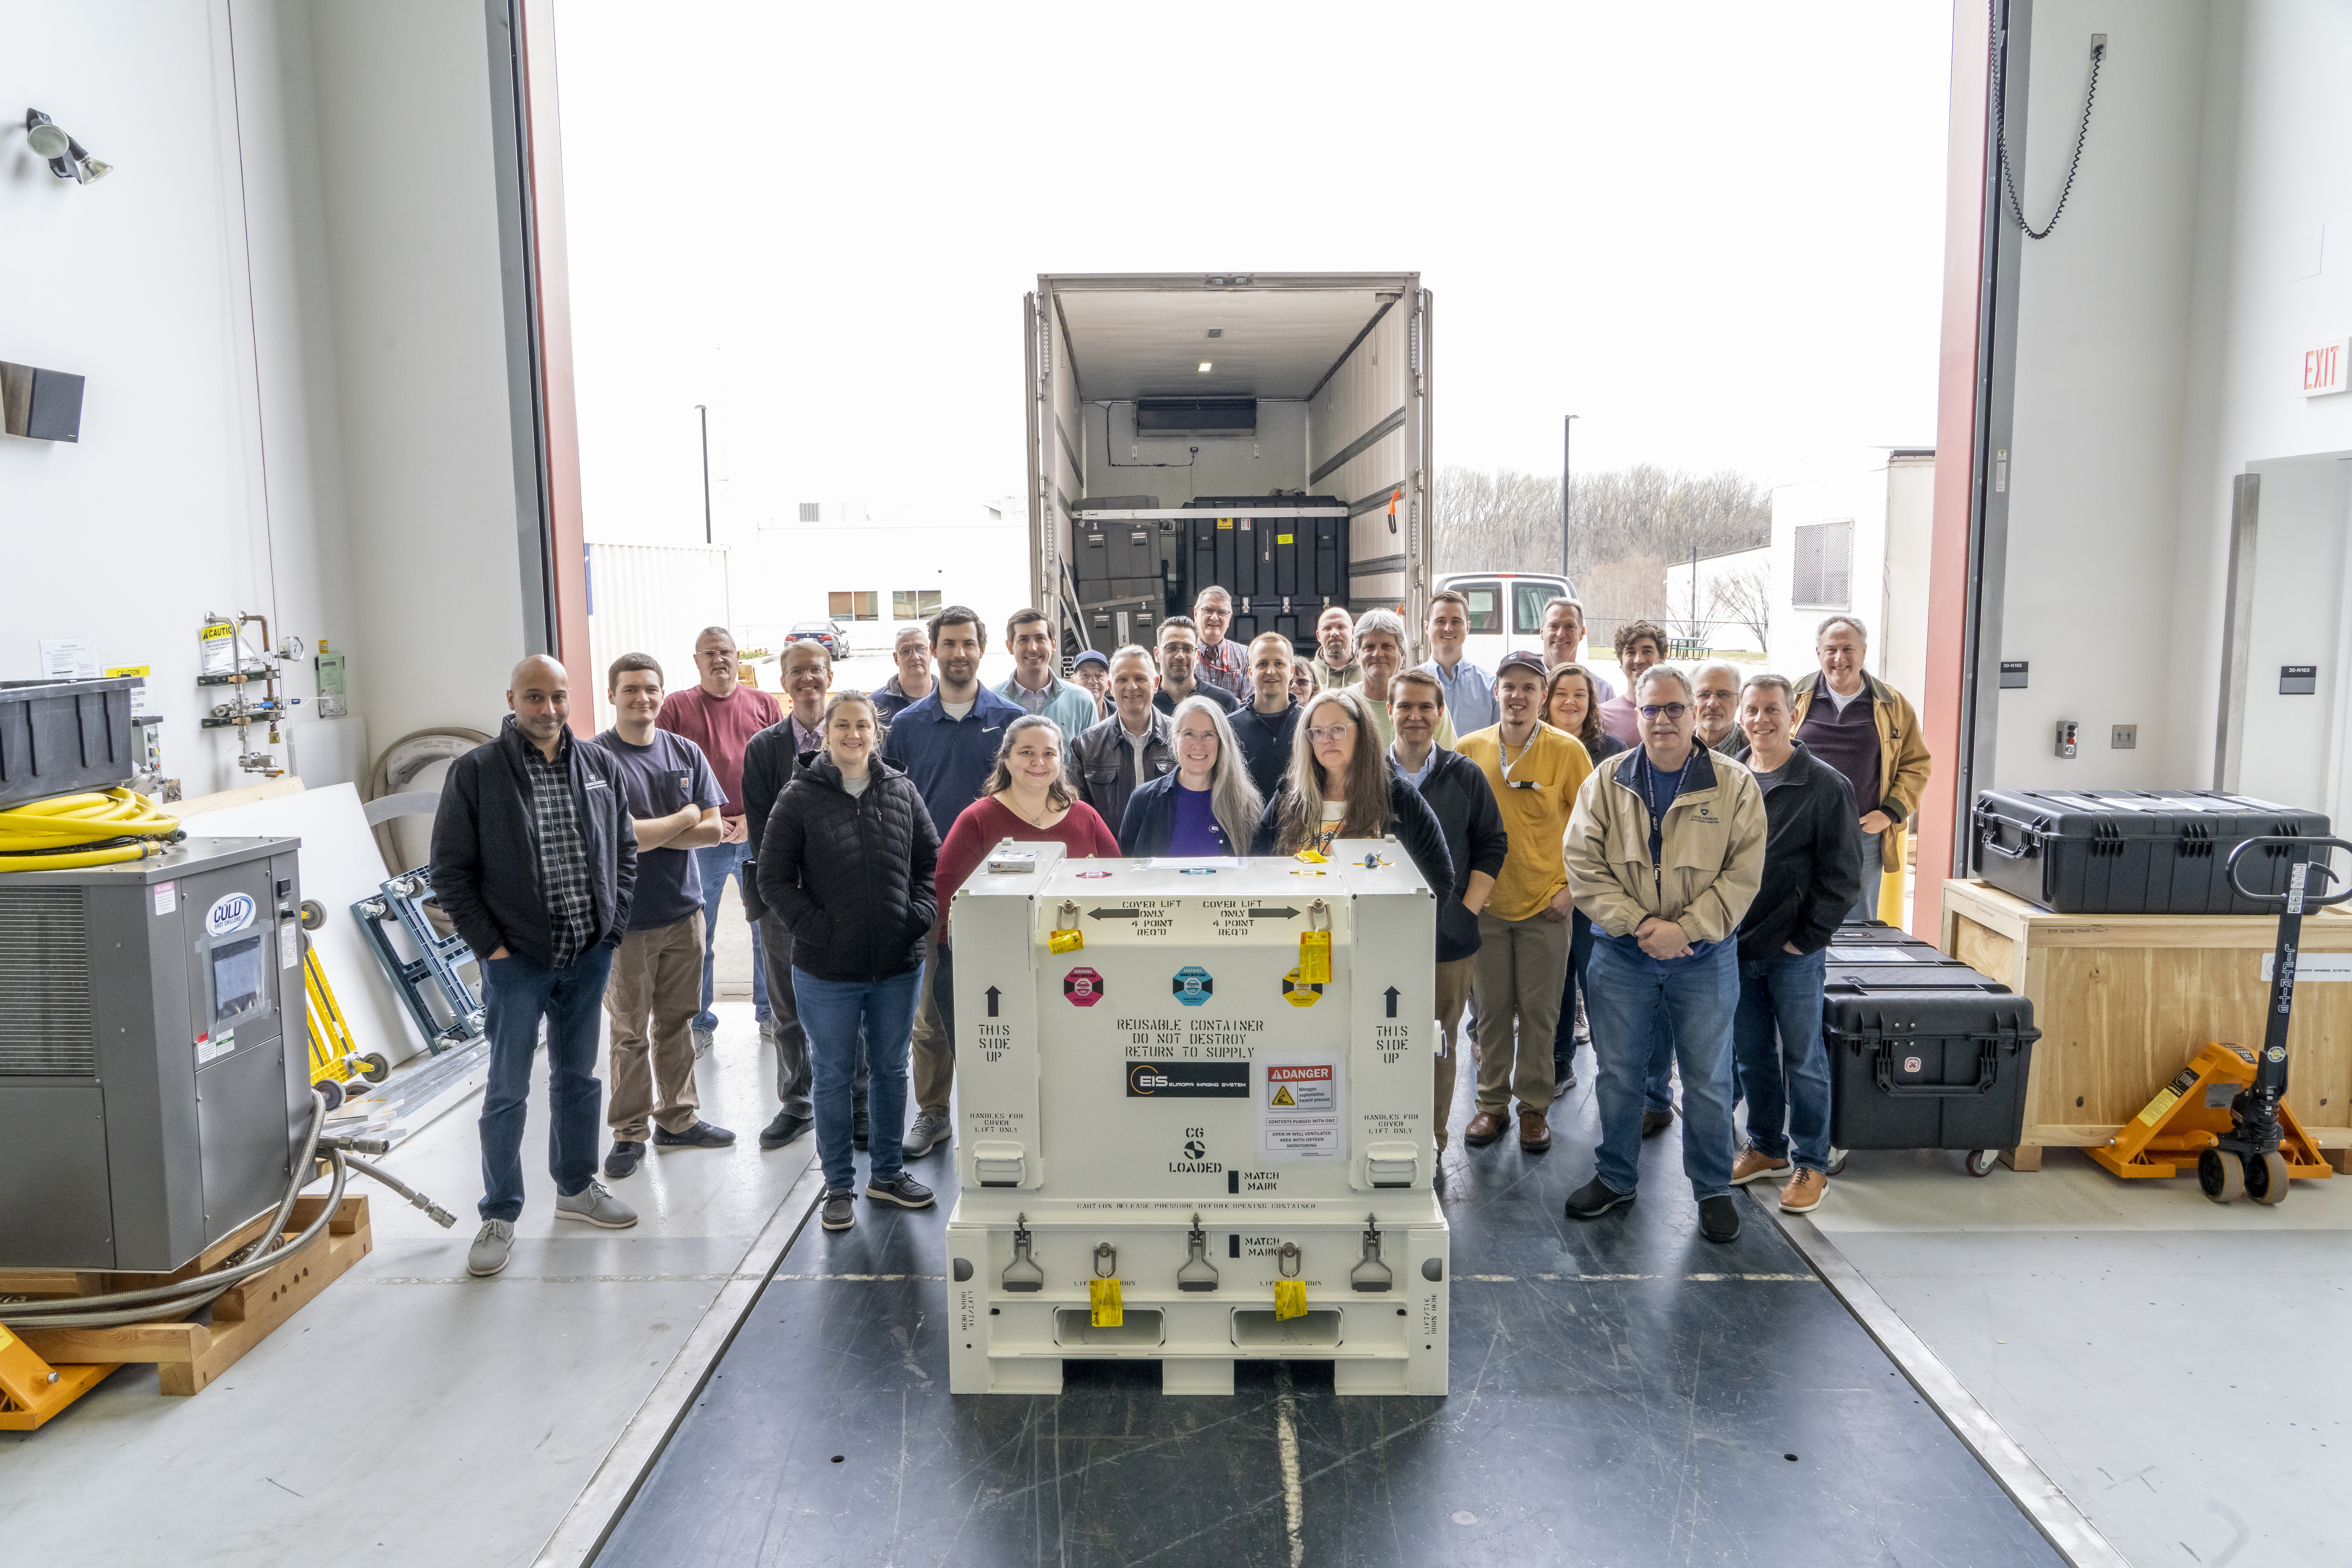 A group of people stand in front of the open doors of a FedEx truck and behind a closed white temperature-sensitive box that&#039;s holding the EIS NAC instrument